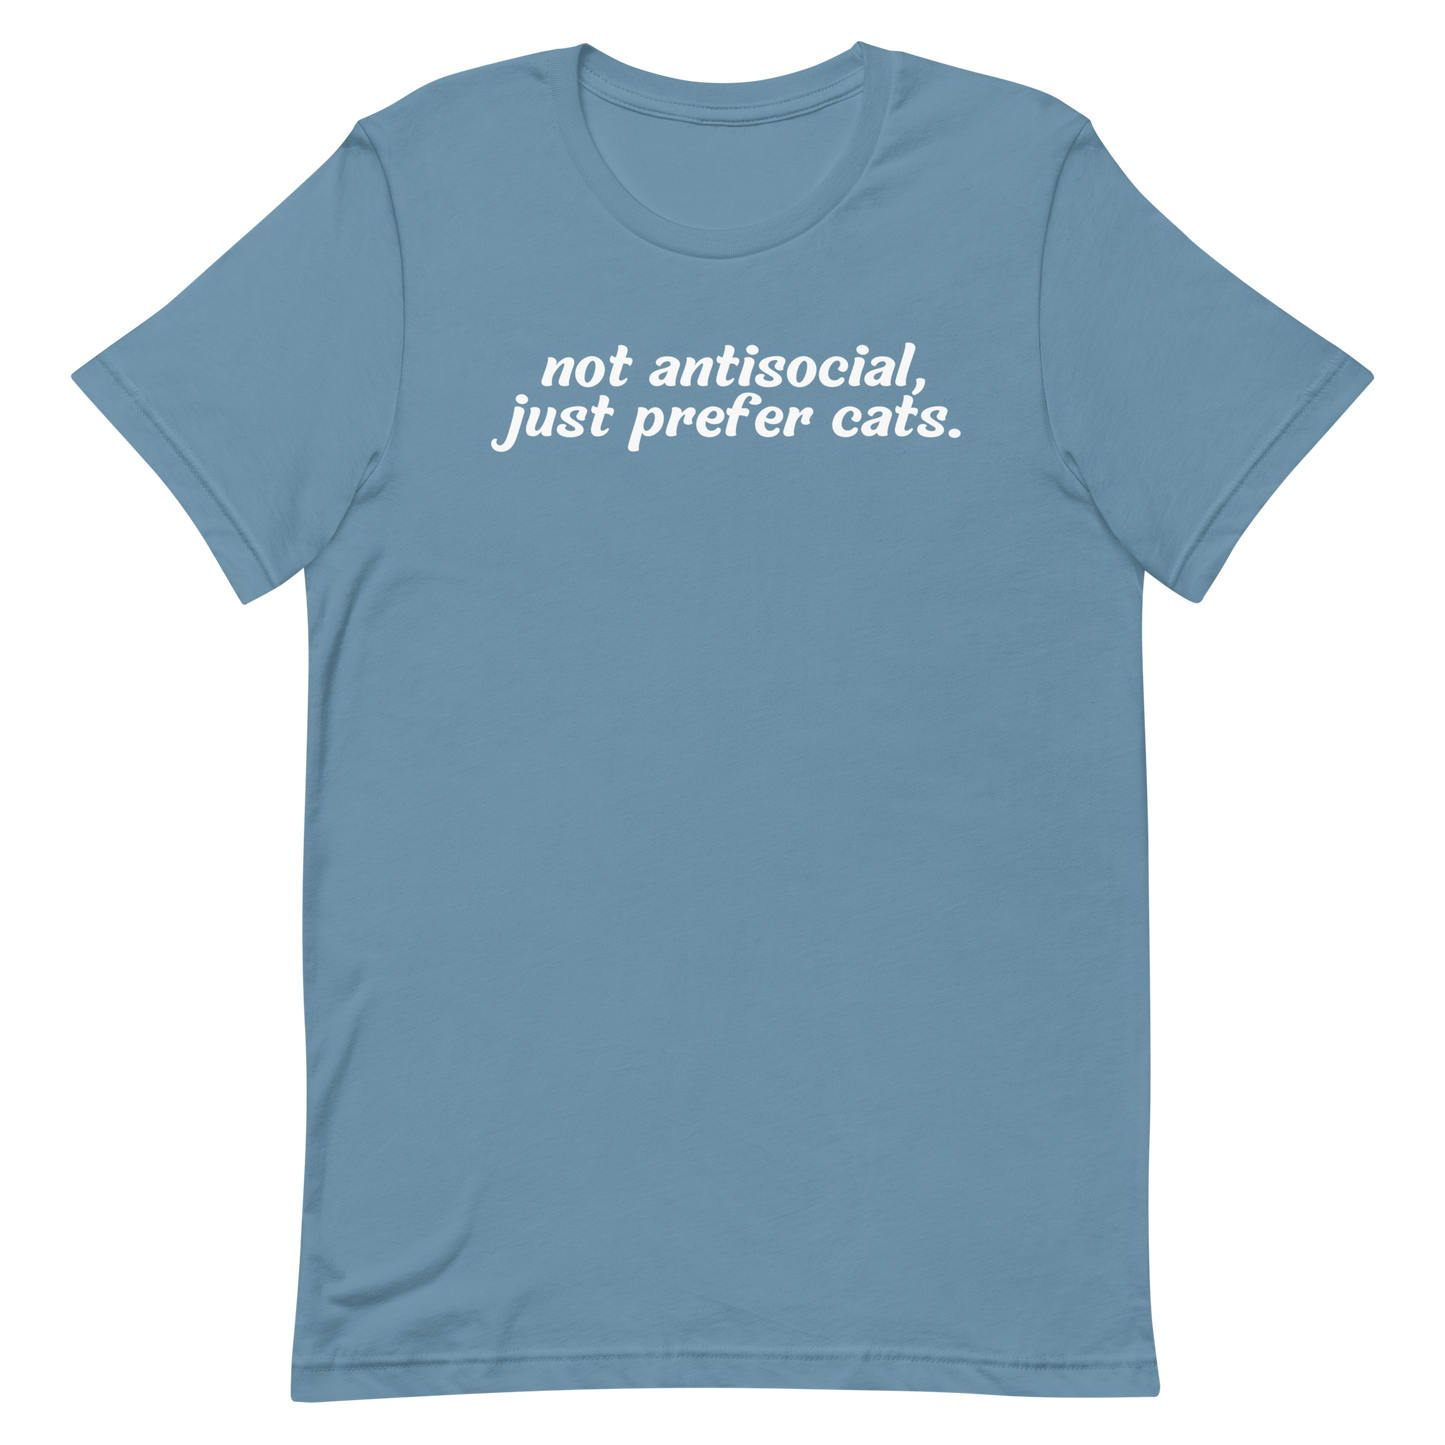 not antisocial, just prefer cats.